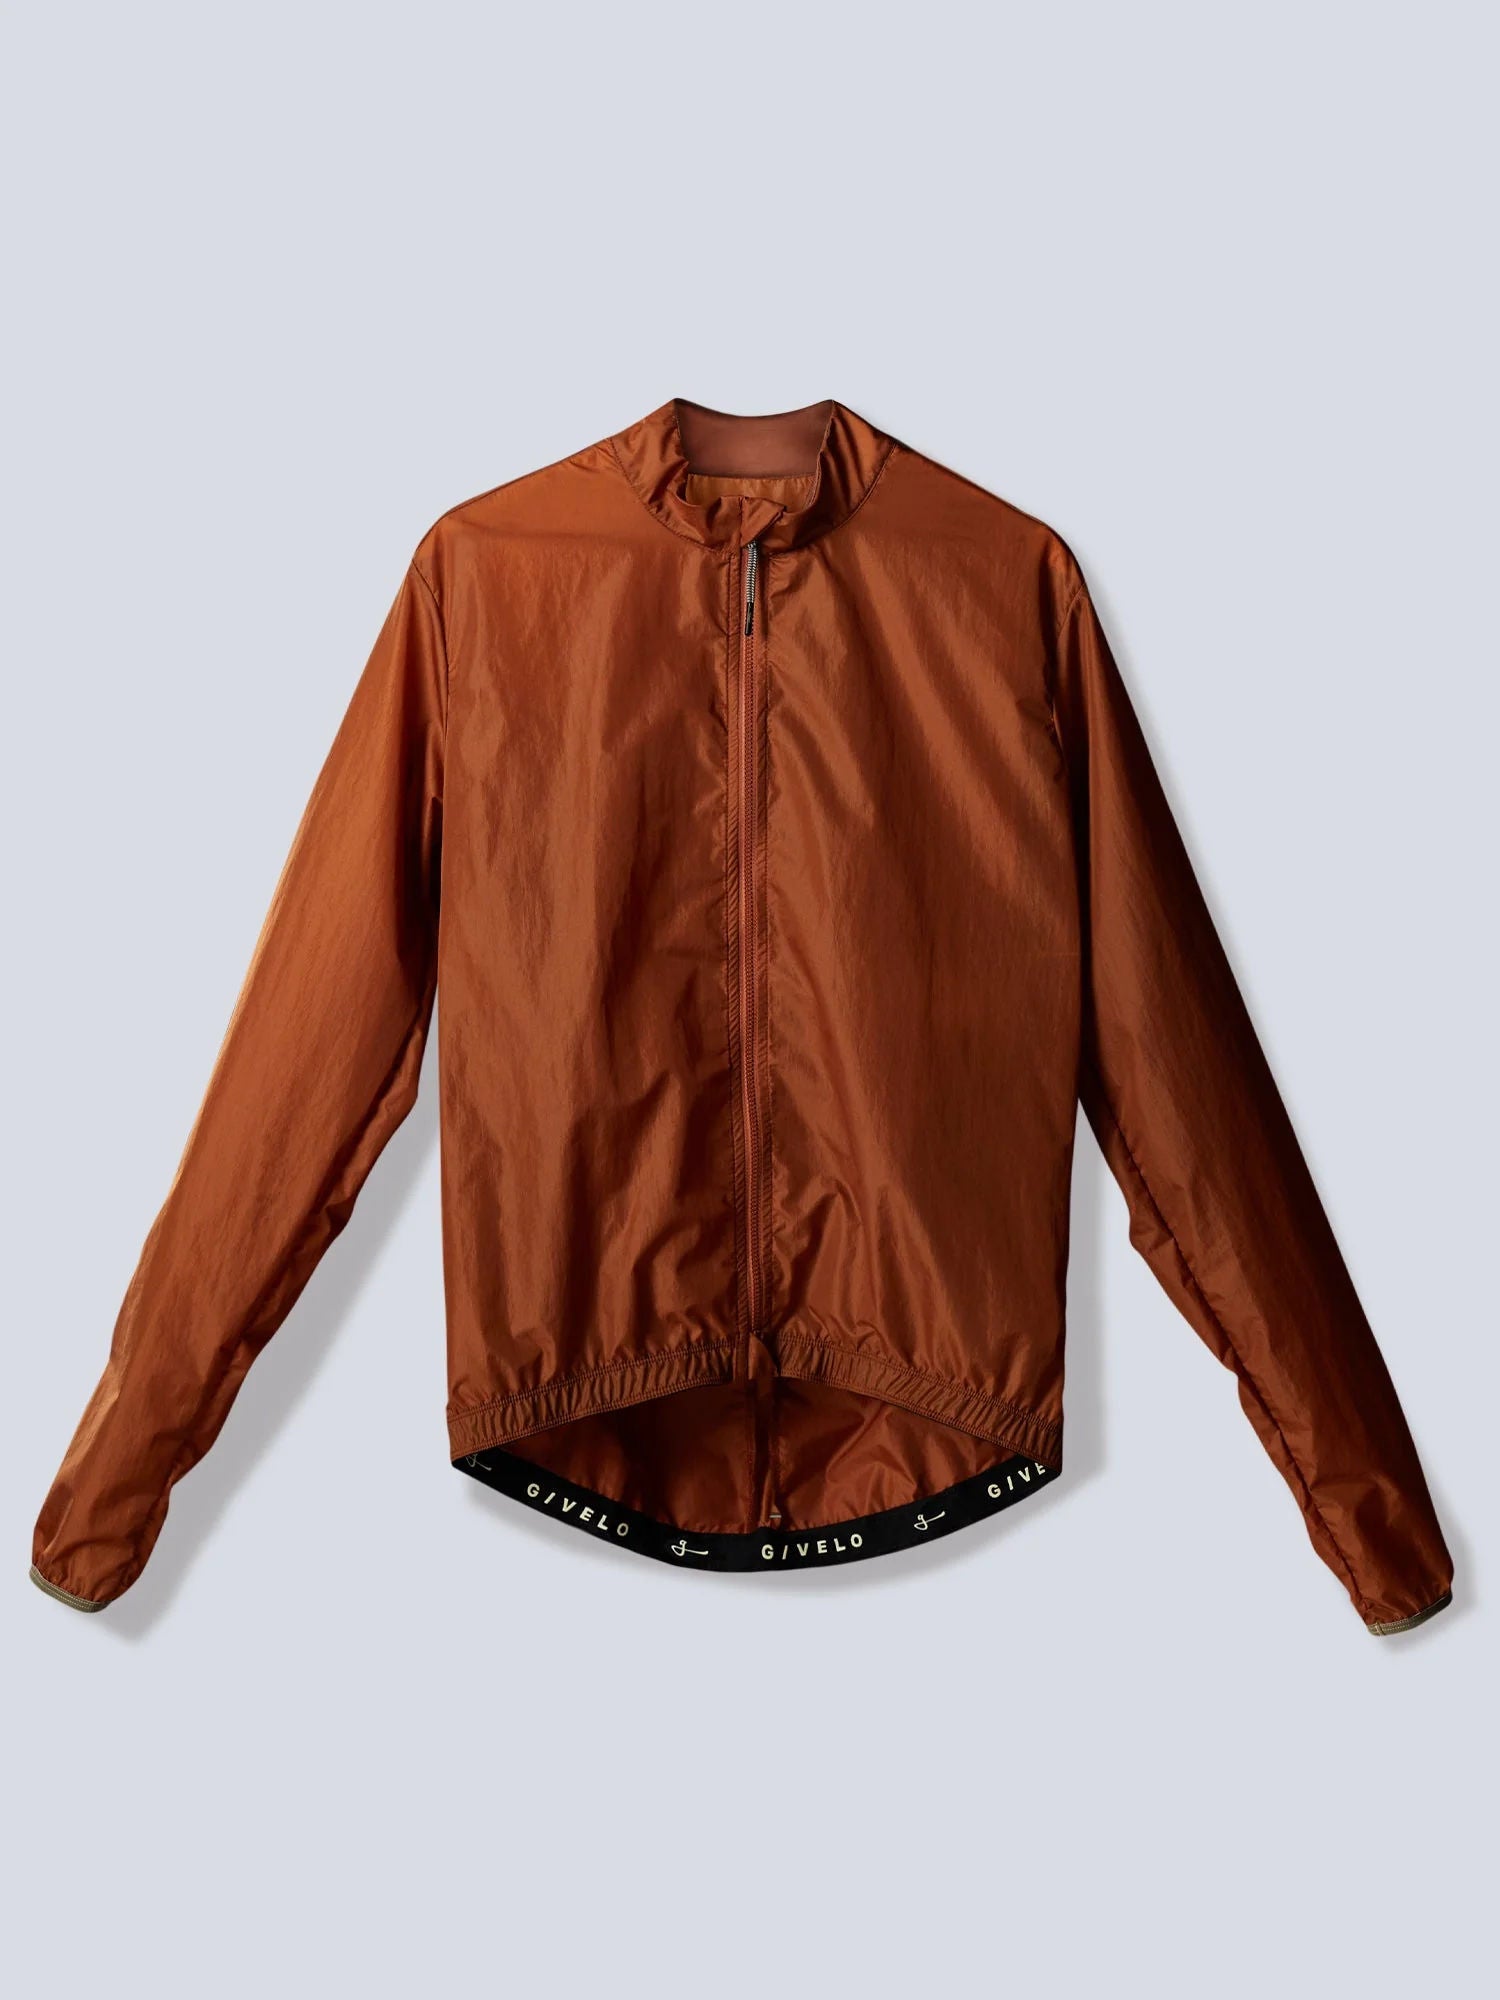 GIVELO MEN'S C.D.A SIENNA サイクル シェル ジャケット | GEARED